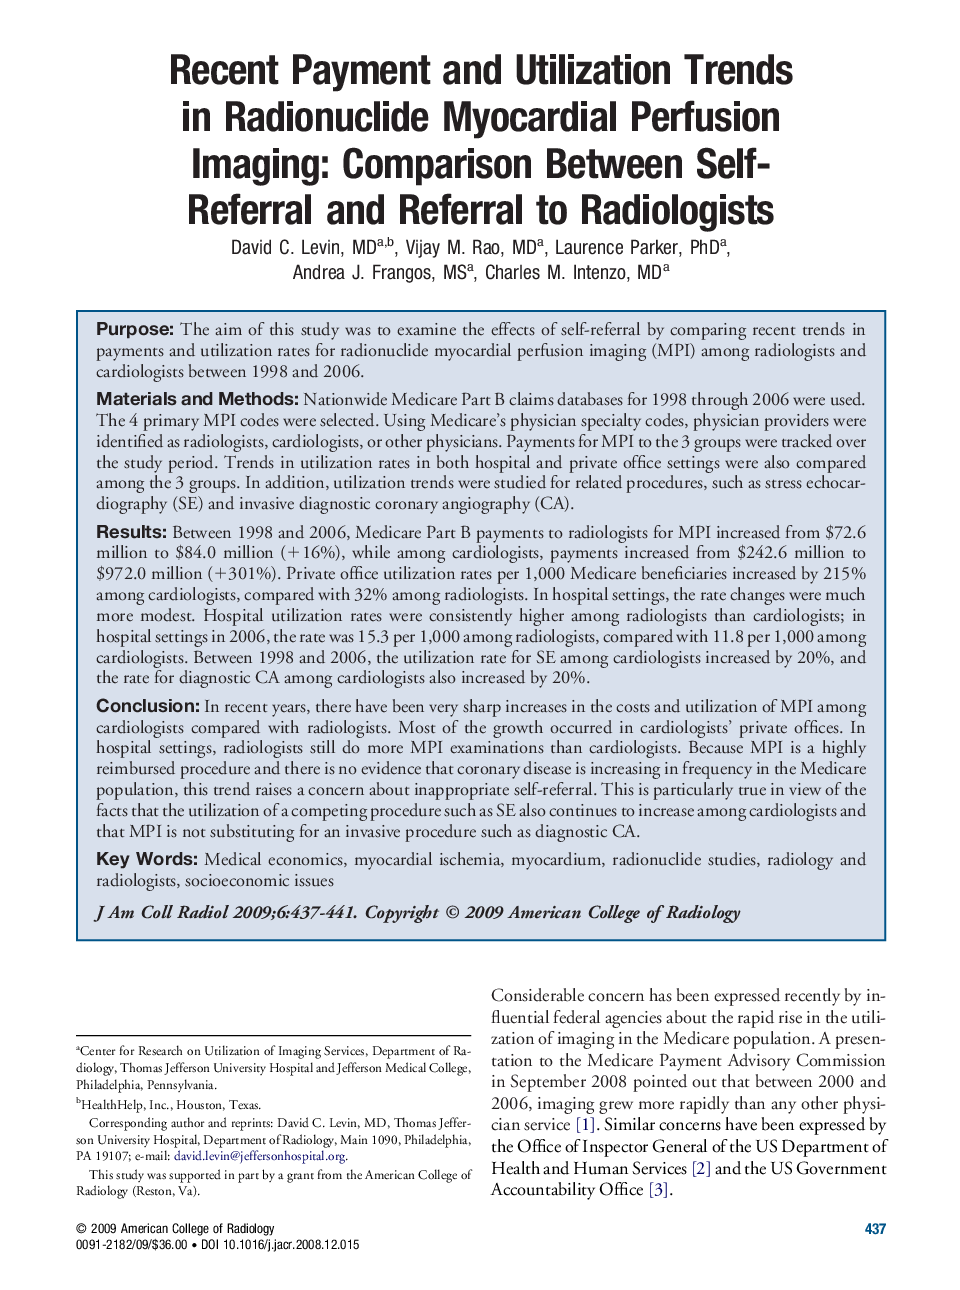 Recent Payment and Utilization Trends in Radionuclide Myocardial Perfusion Imaging: Comparison Between Self-Referral and Referral to Radiologists